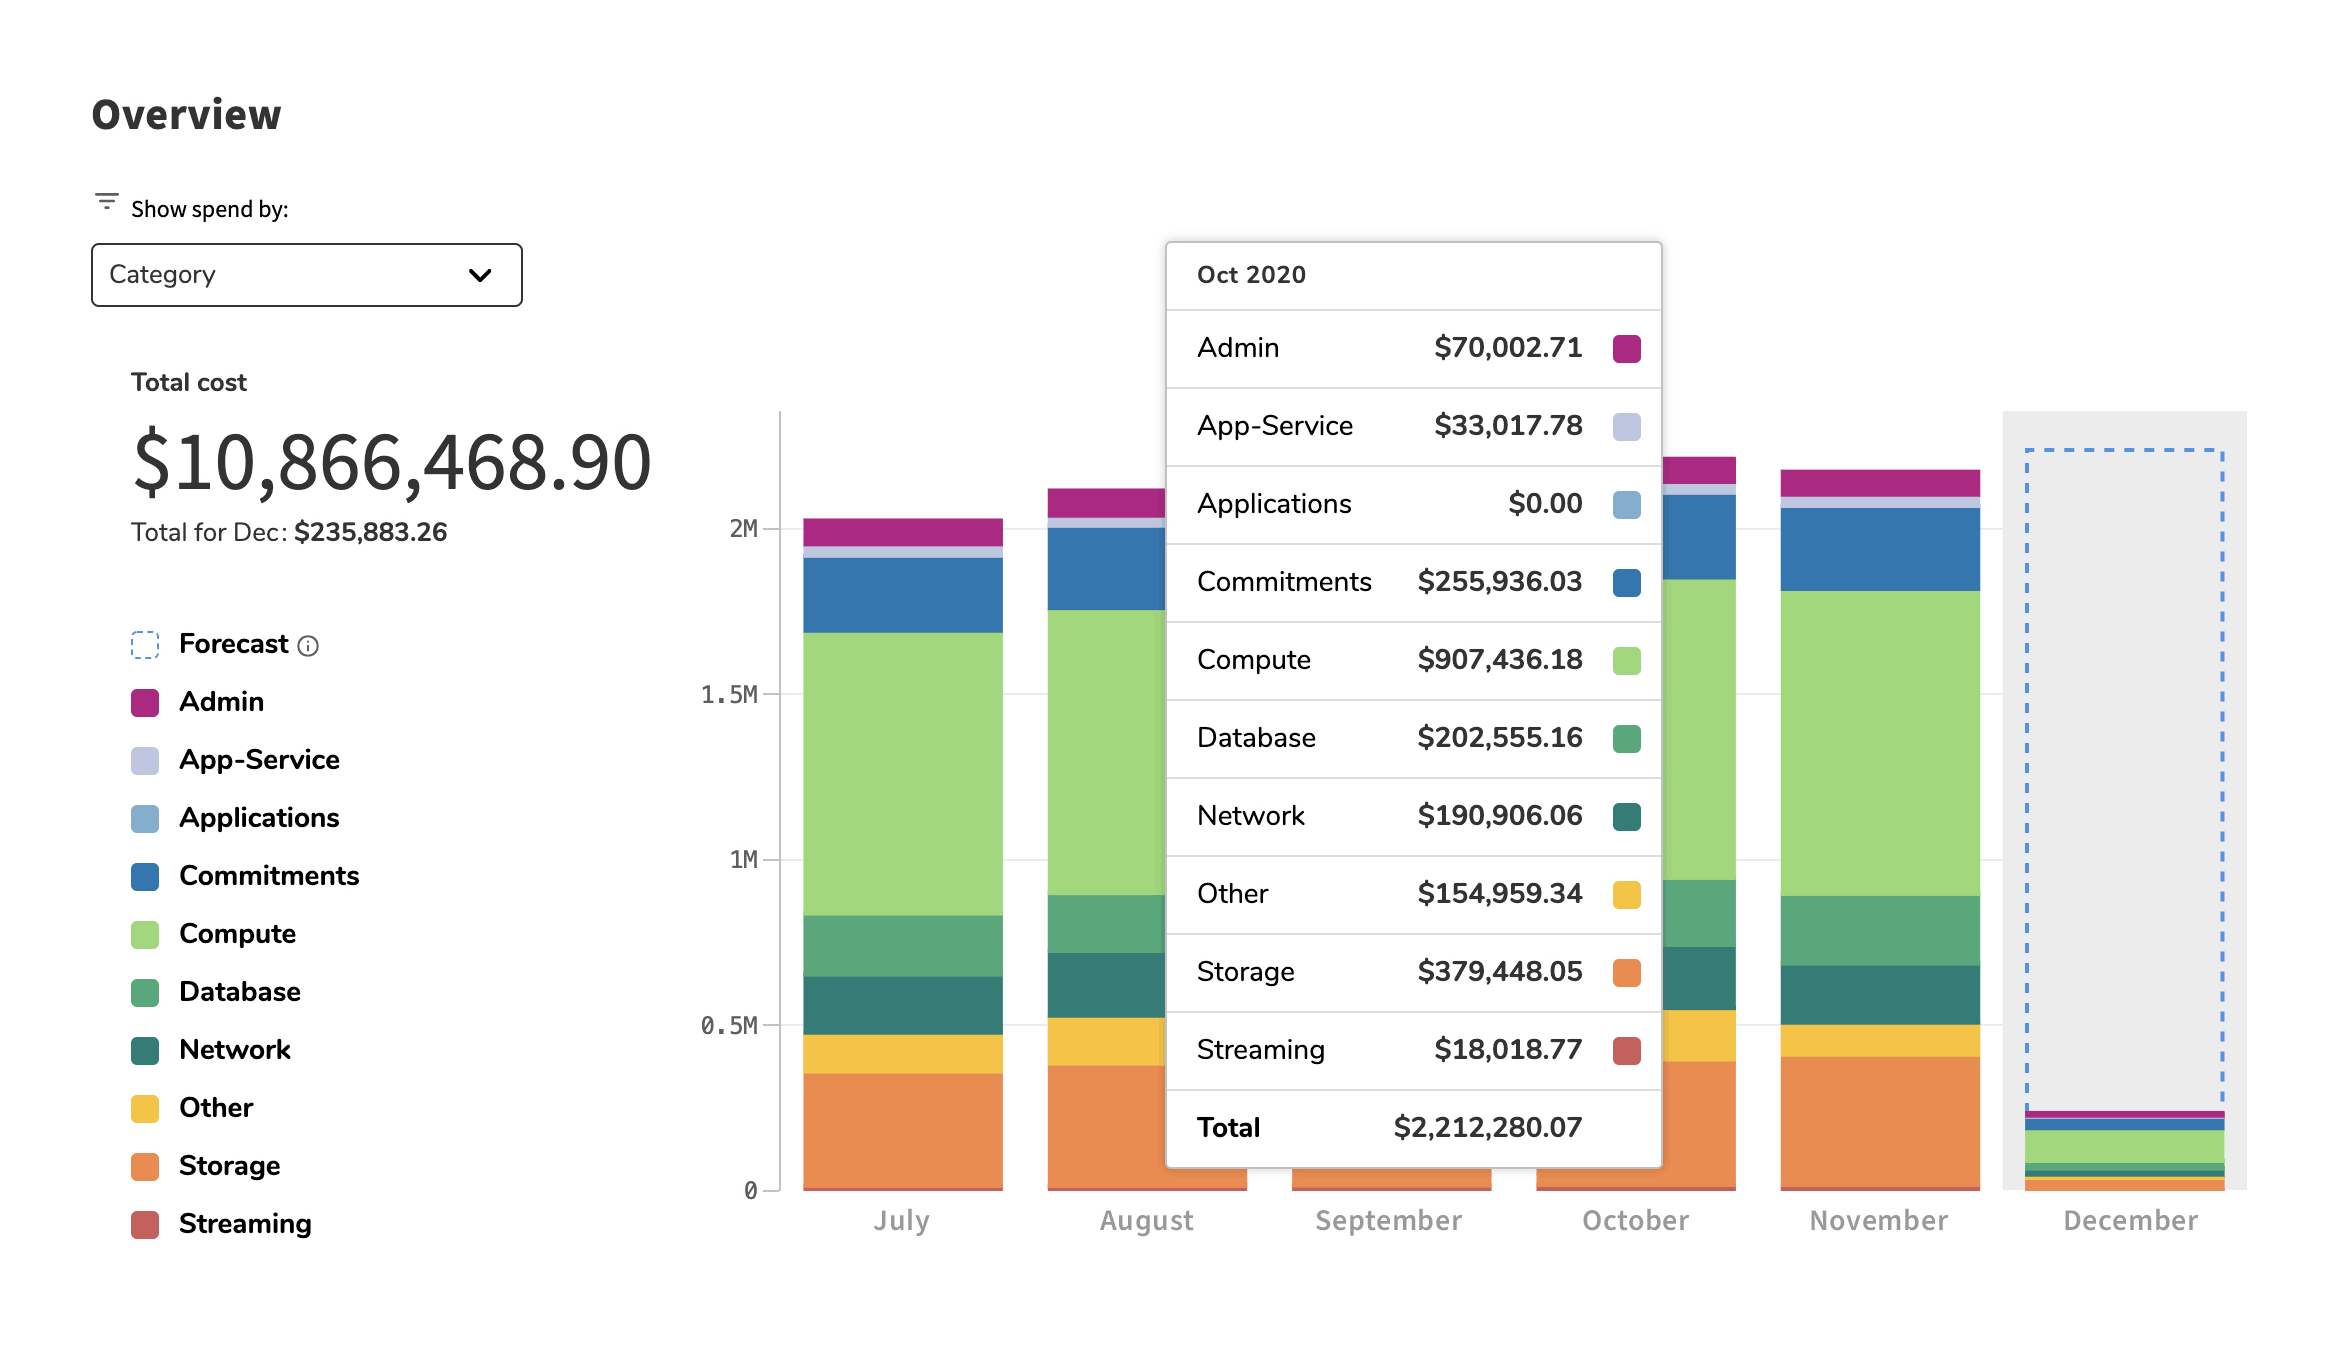 Cost Overview by Month